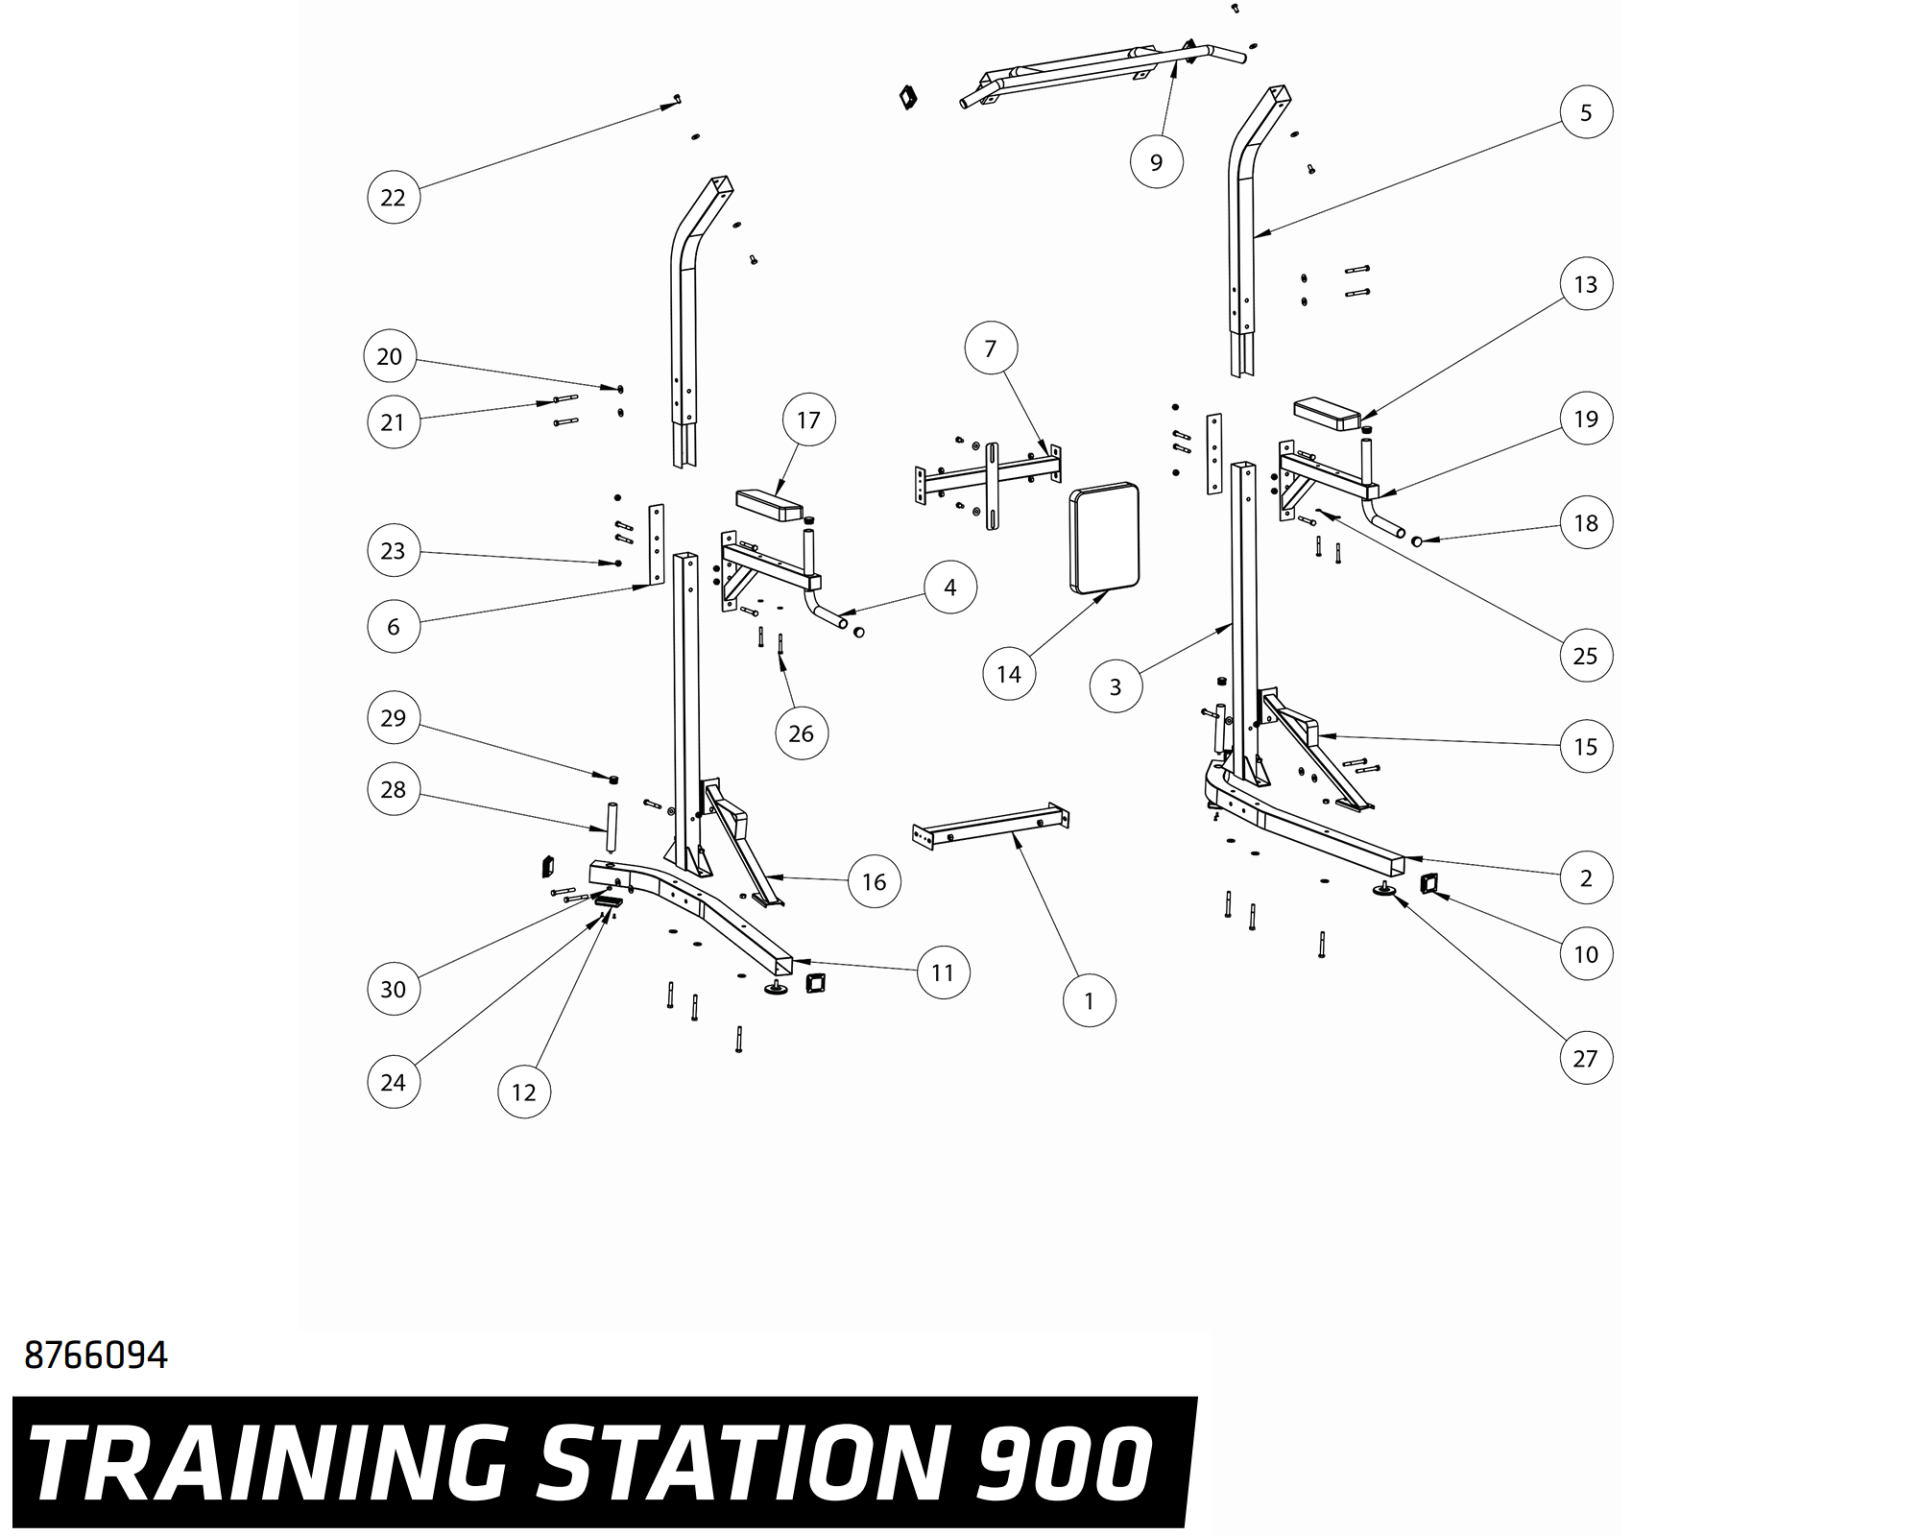 Corength 900 Training Station user guide and repairs